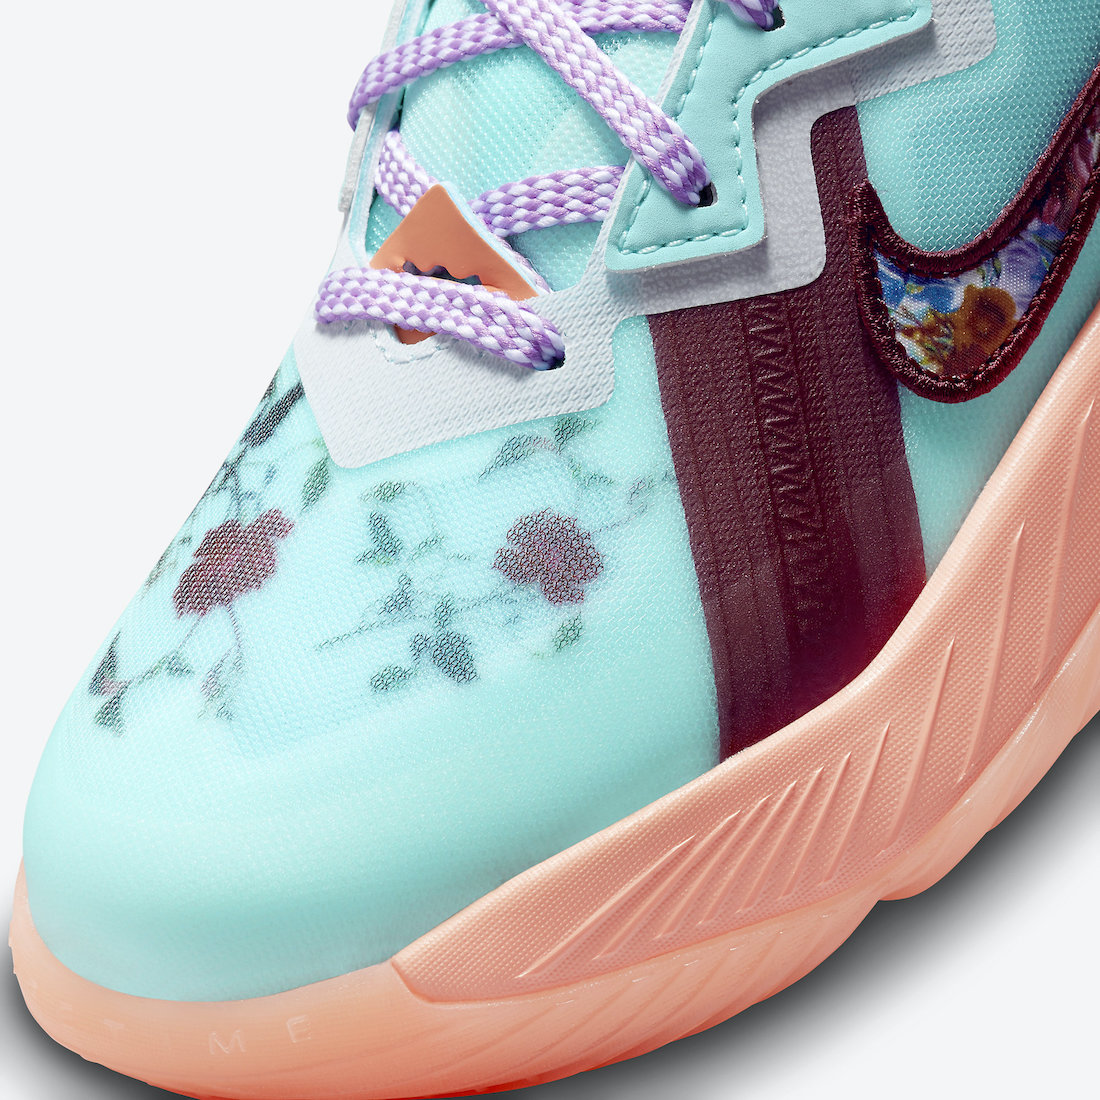 Nike LeBron 18 Low GS Floral DN4177-400 Release Date